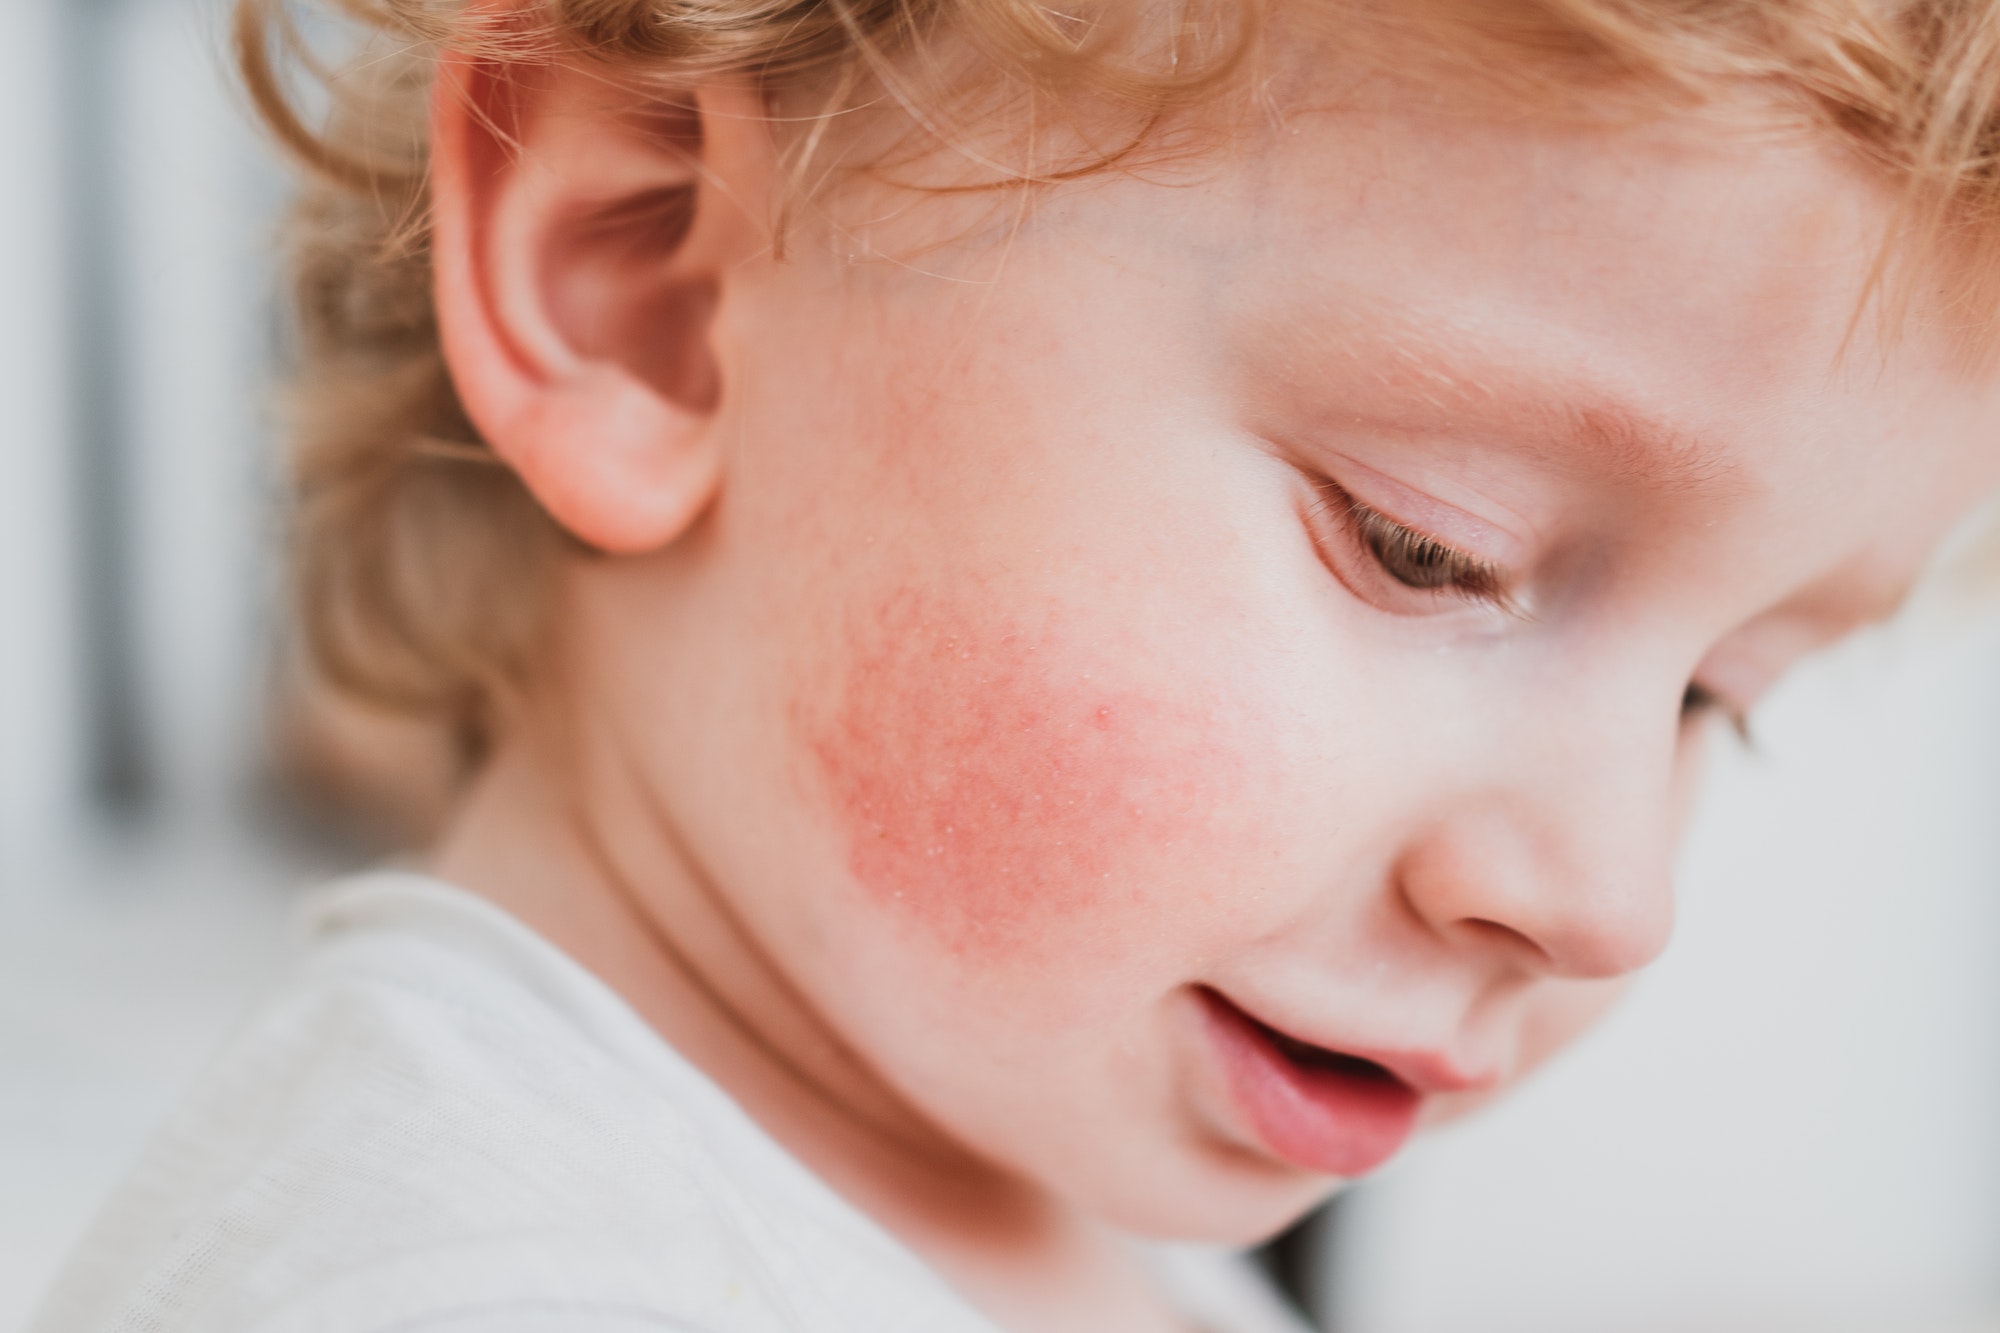 food allergies, eczema, or diathesis in a small child on the cheeks